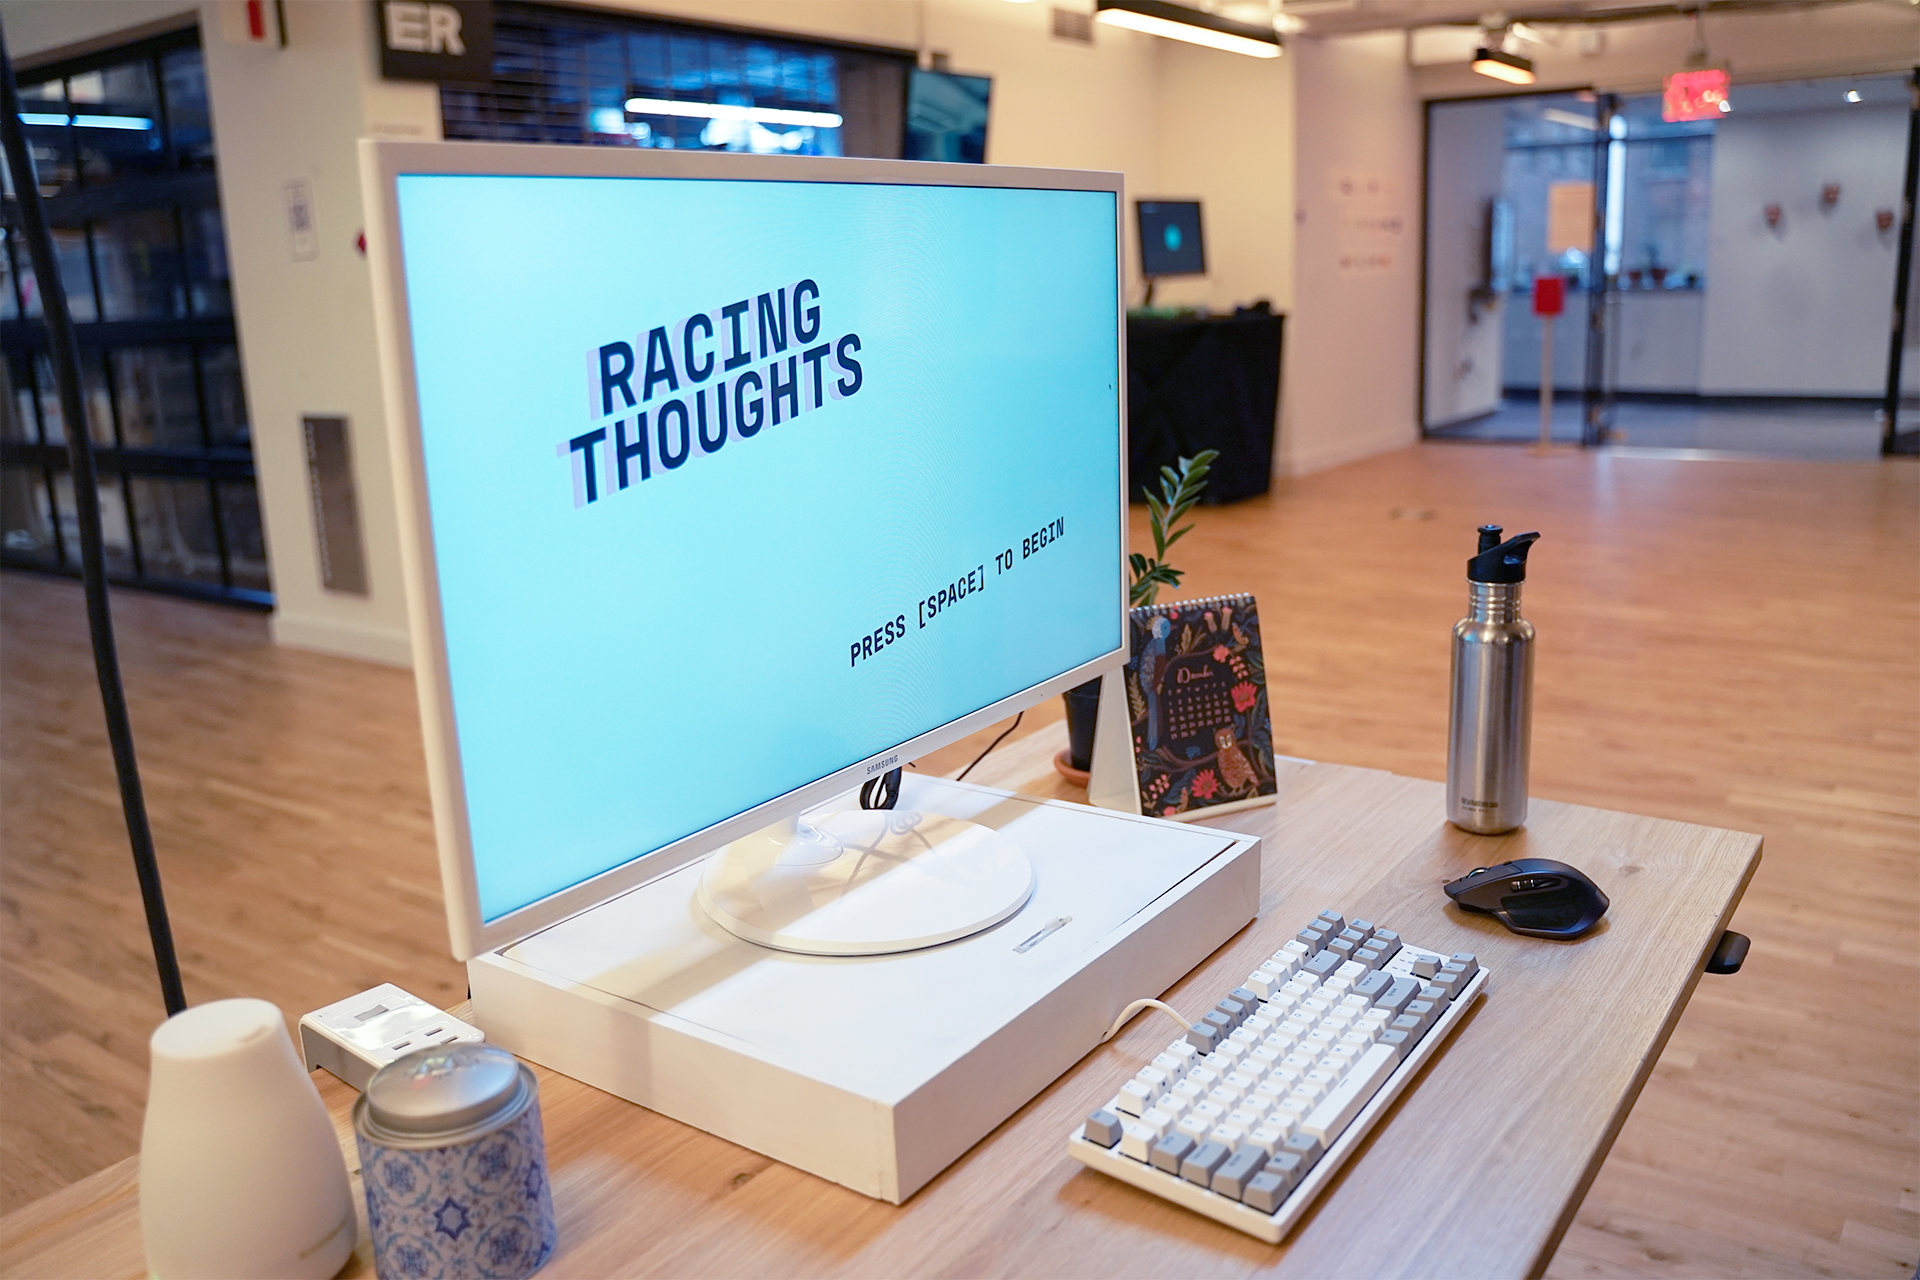 Racing Thoughts at the ITP Winter Show 2019